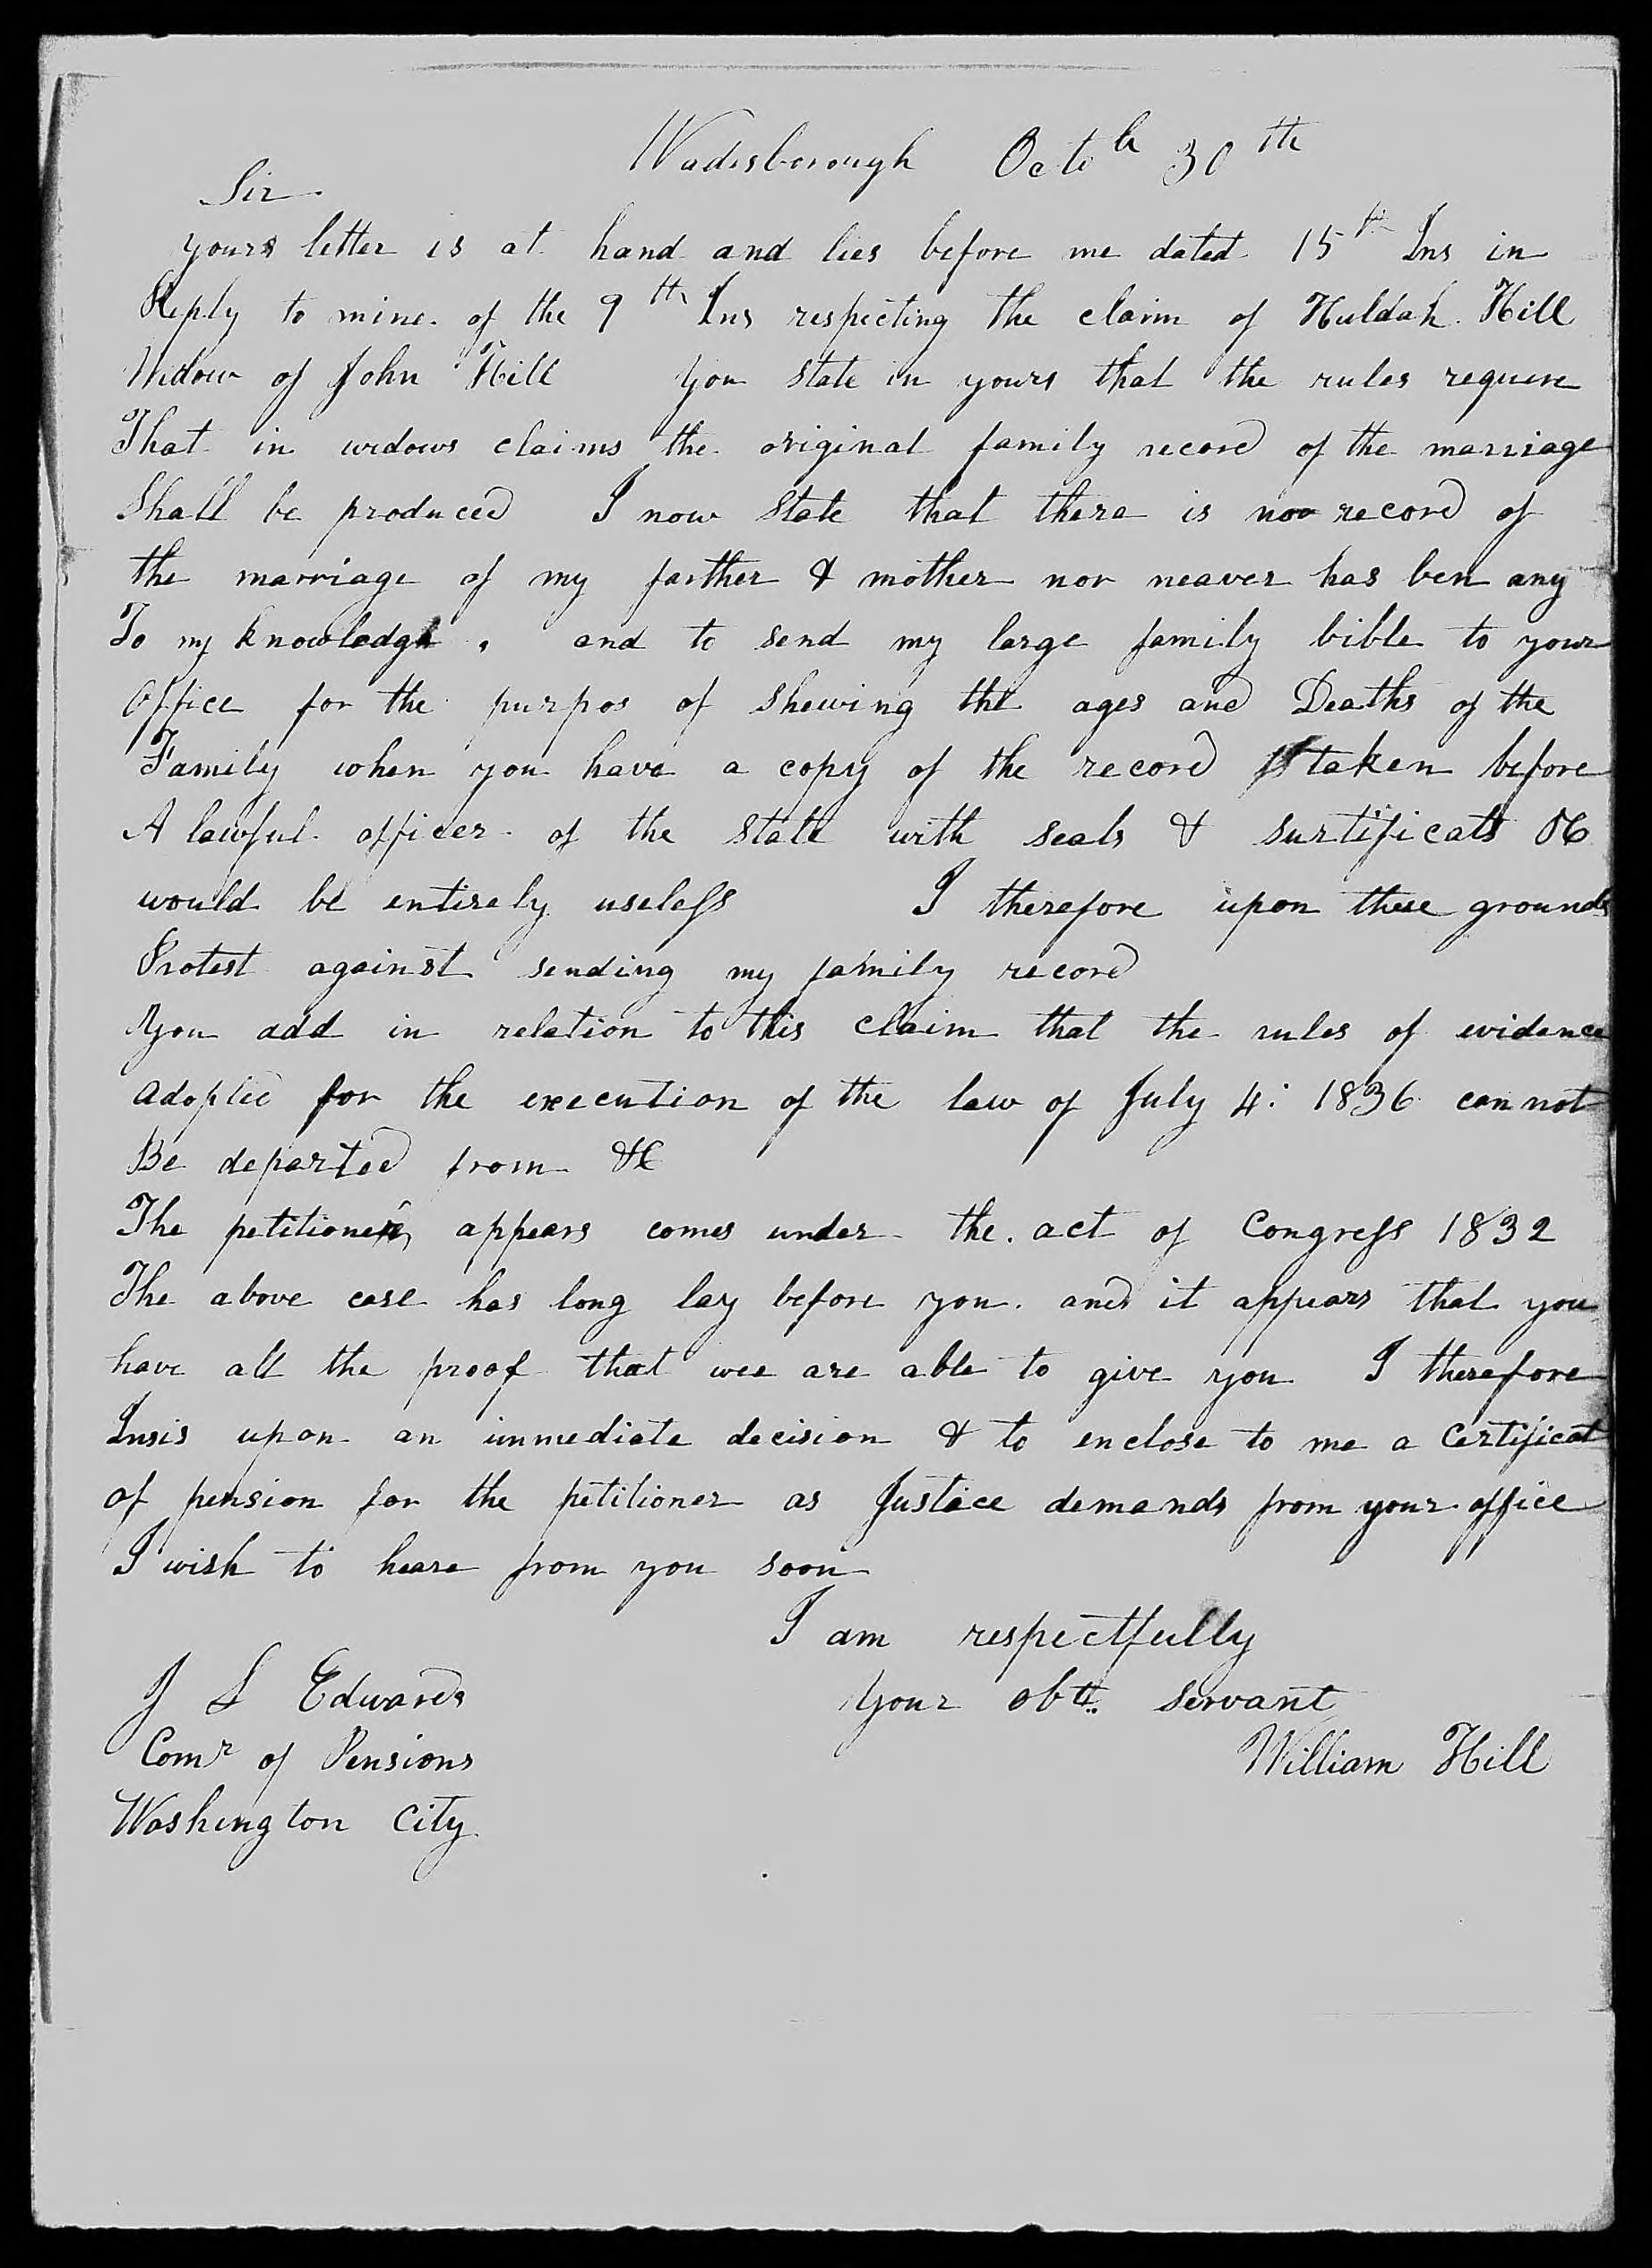 Letter from William Hill to James L. Edwards, 30 October 1840